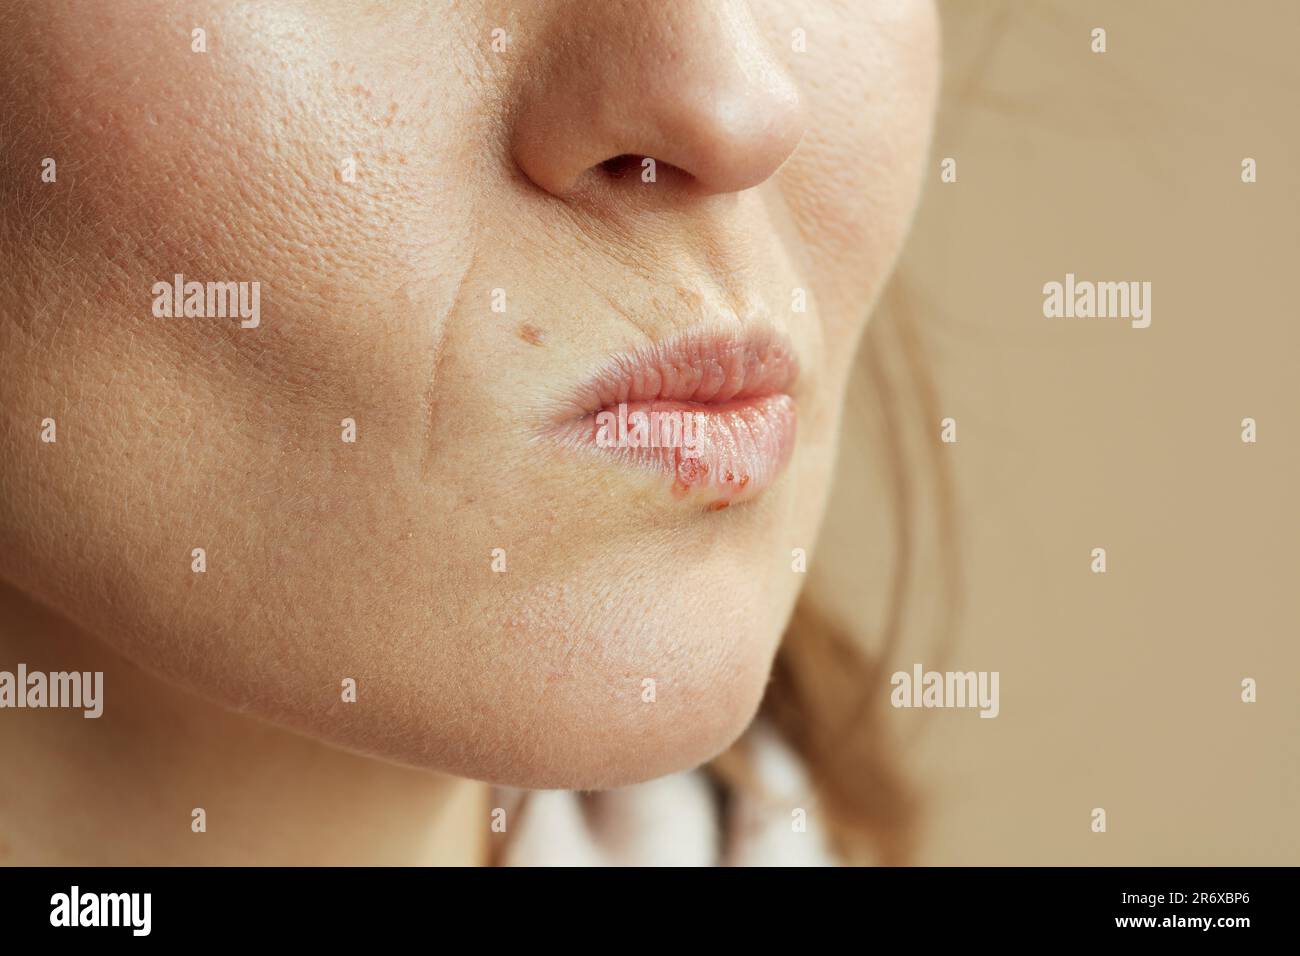 Closeup on woman with herpes on lips isolated on beige background. Stock Photo